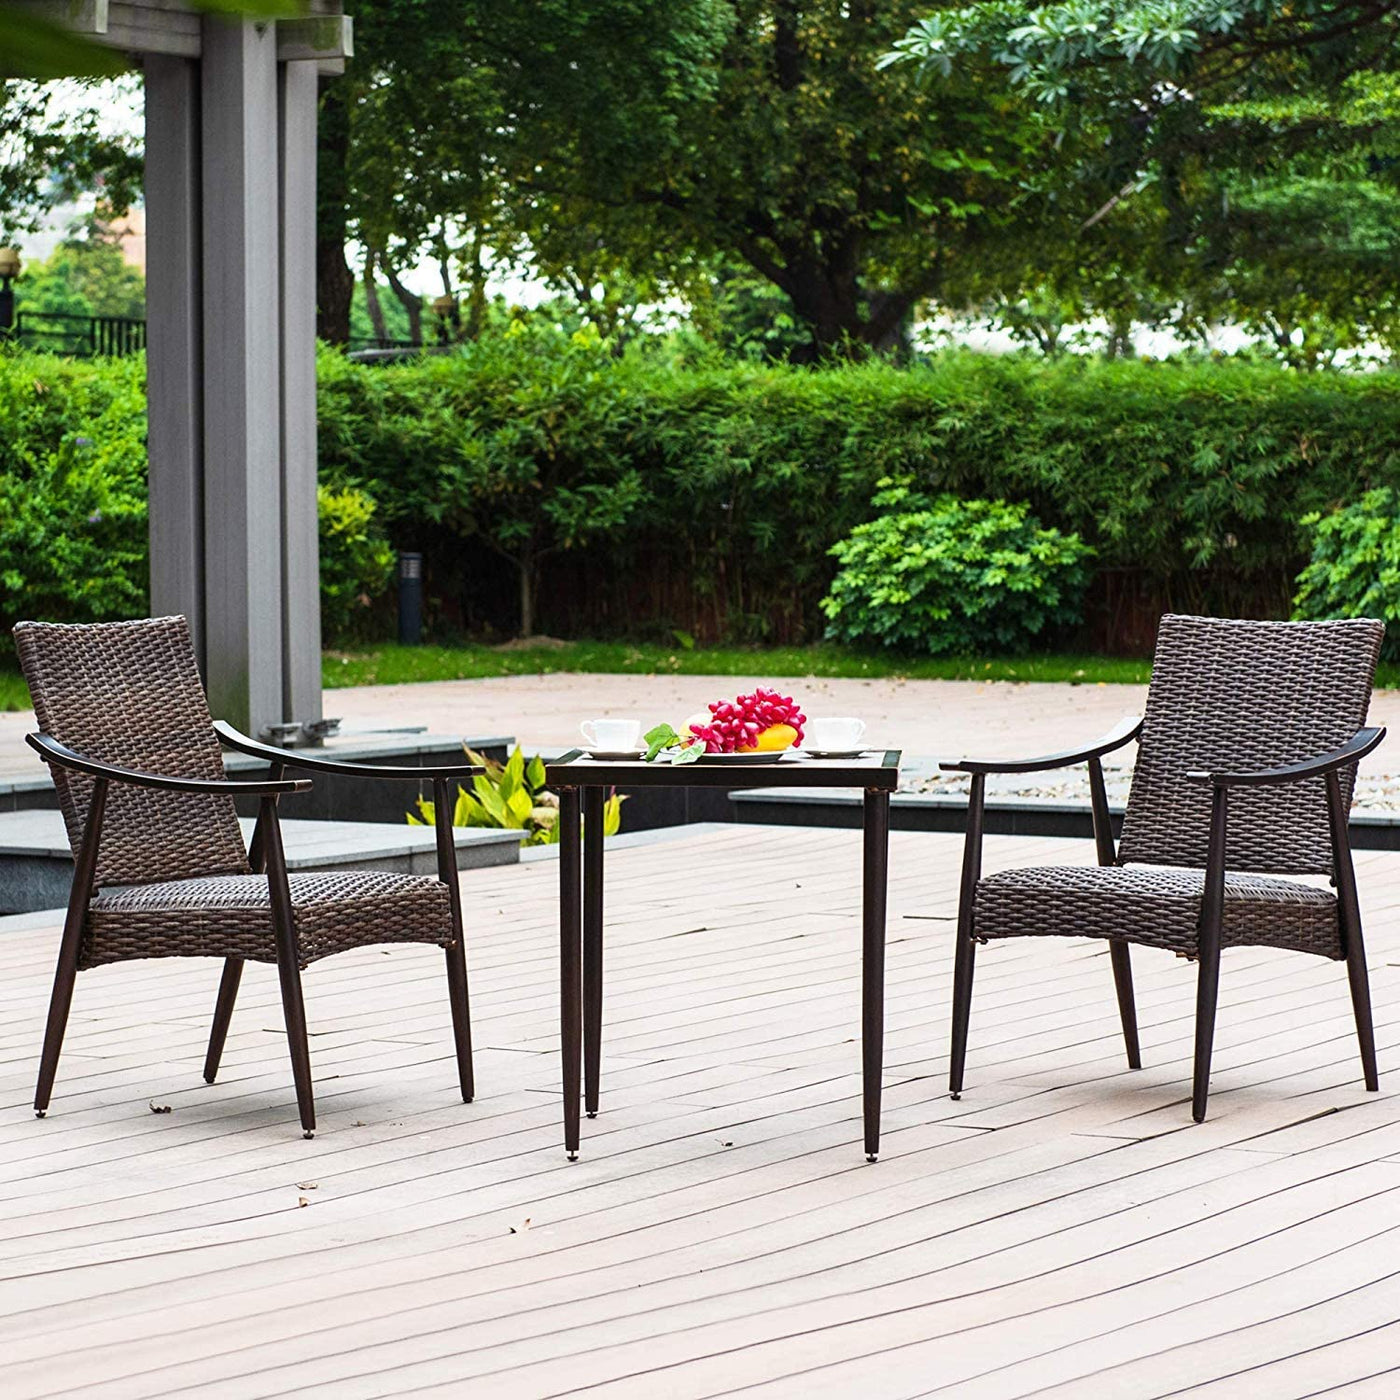 Set of 3 Patio Bistro Table and Wicker Chairs Outdoor Garden Lawn Furniture